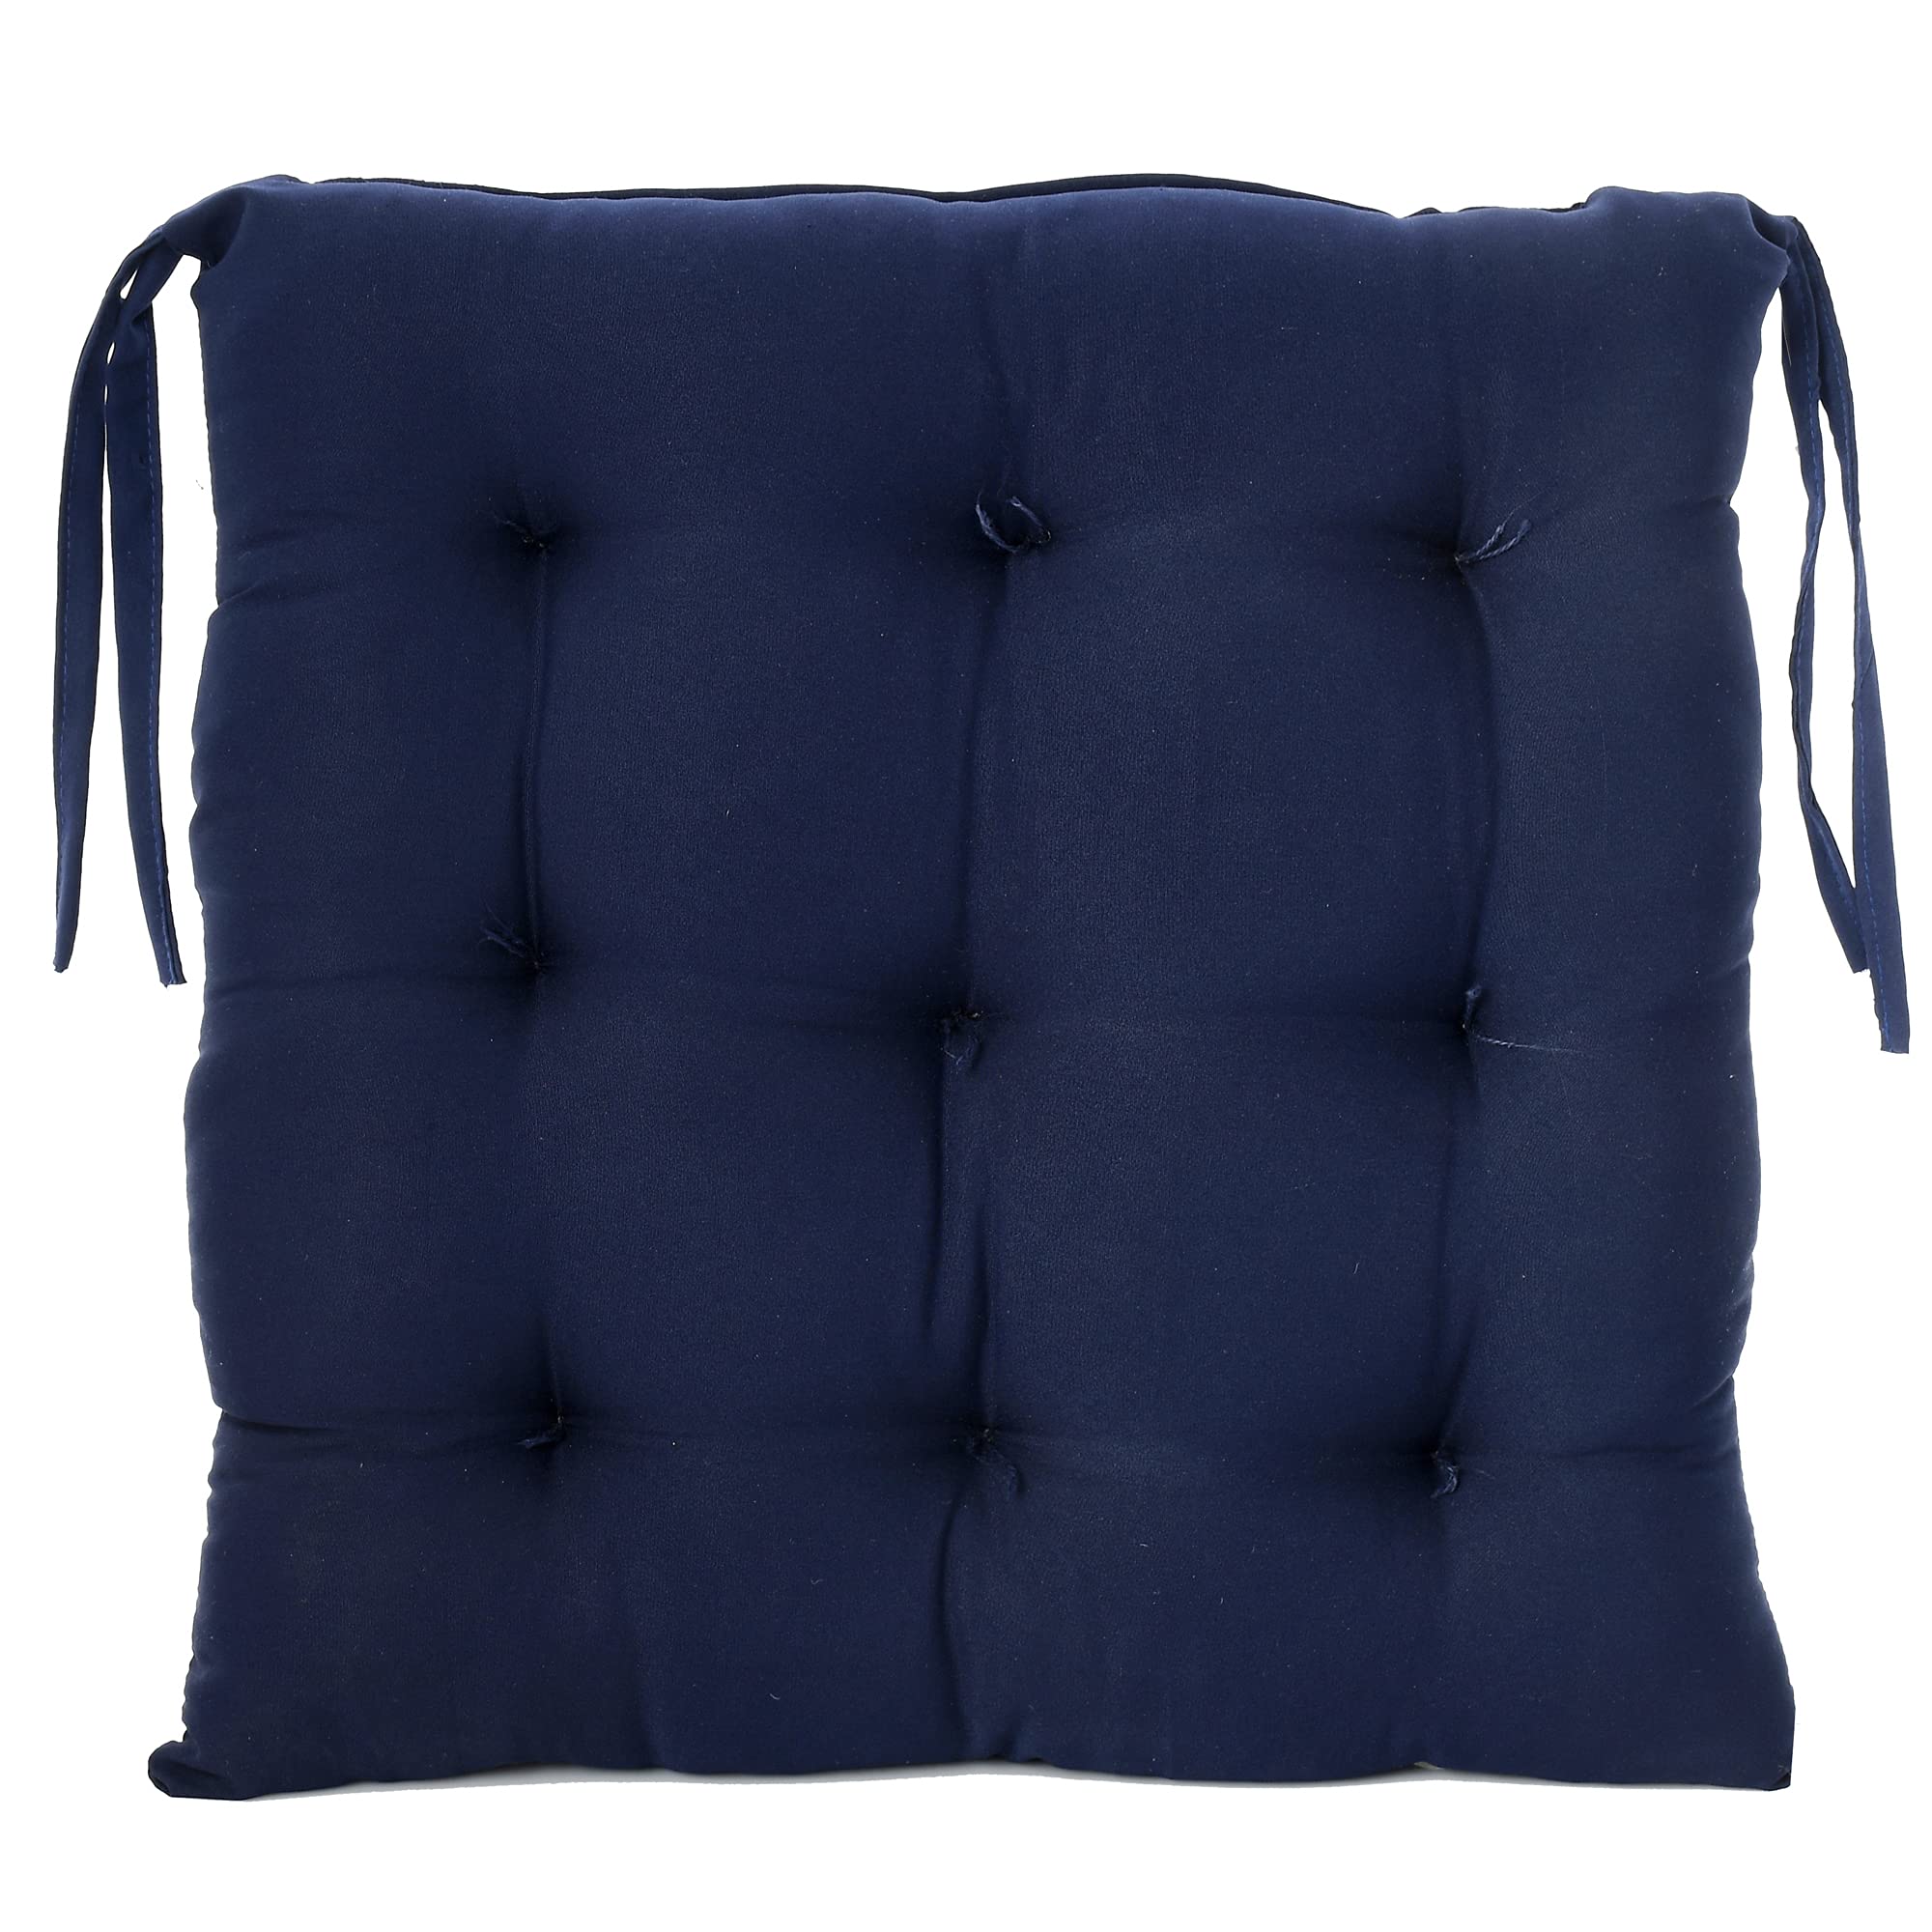 Kuber Industries Microfiber Square Chair Pad/Cushion for Office|Home or Car Sitting with Ties (Navy Blue)